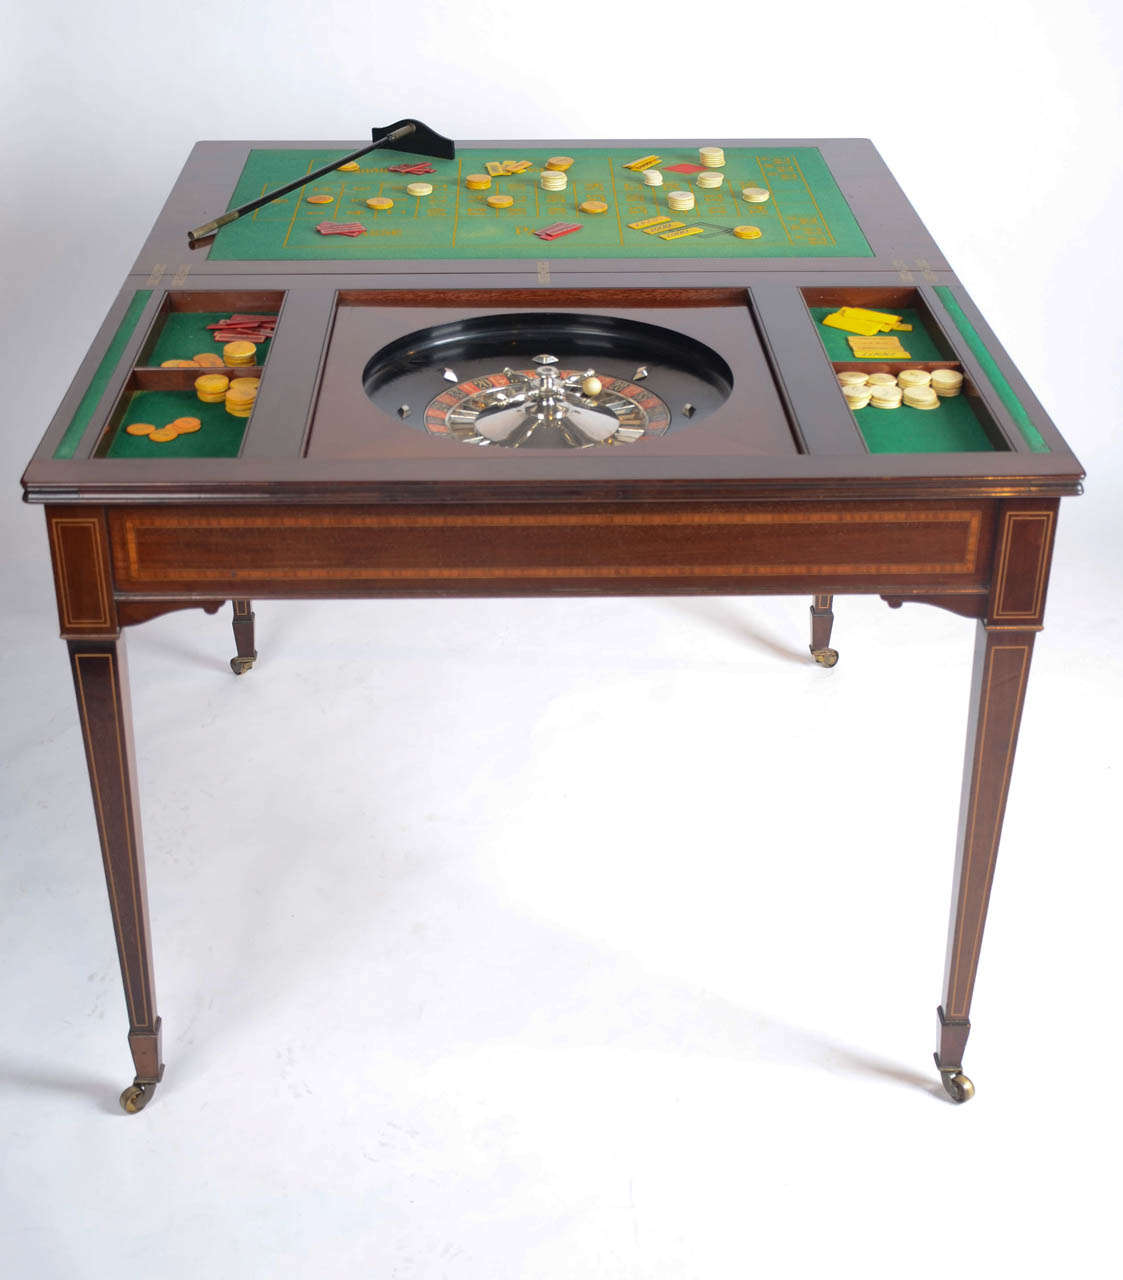 Signed by Sir Hiram Maxim this Unique Games Table was designed and custom made in 1907 for Sir Hiram Maxim, at the behest of King Edward VII whose circle of friends included Lord Roslyn, an avid gambler. Roslyn was certain that he had a system at